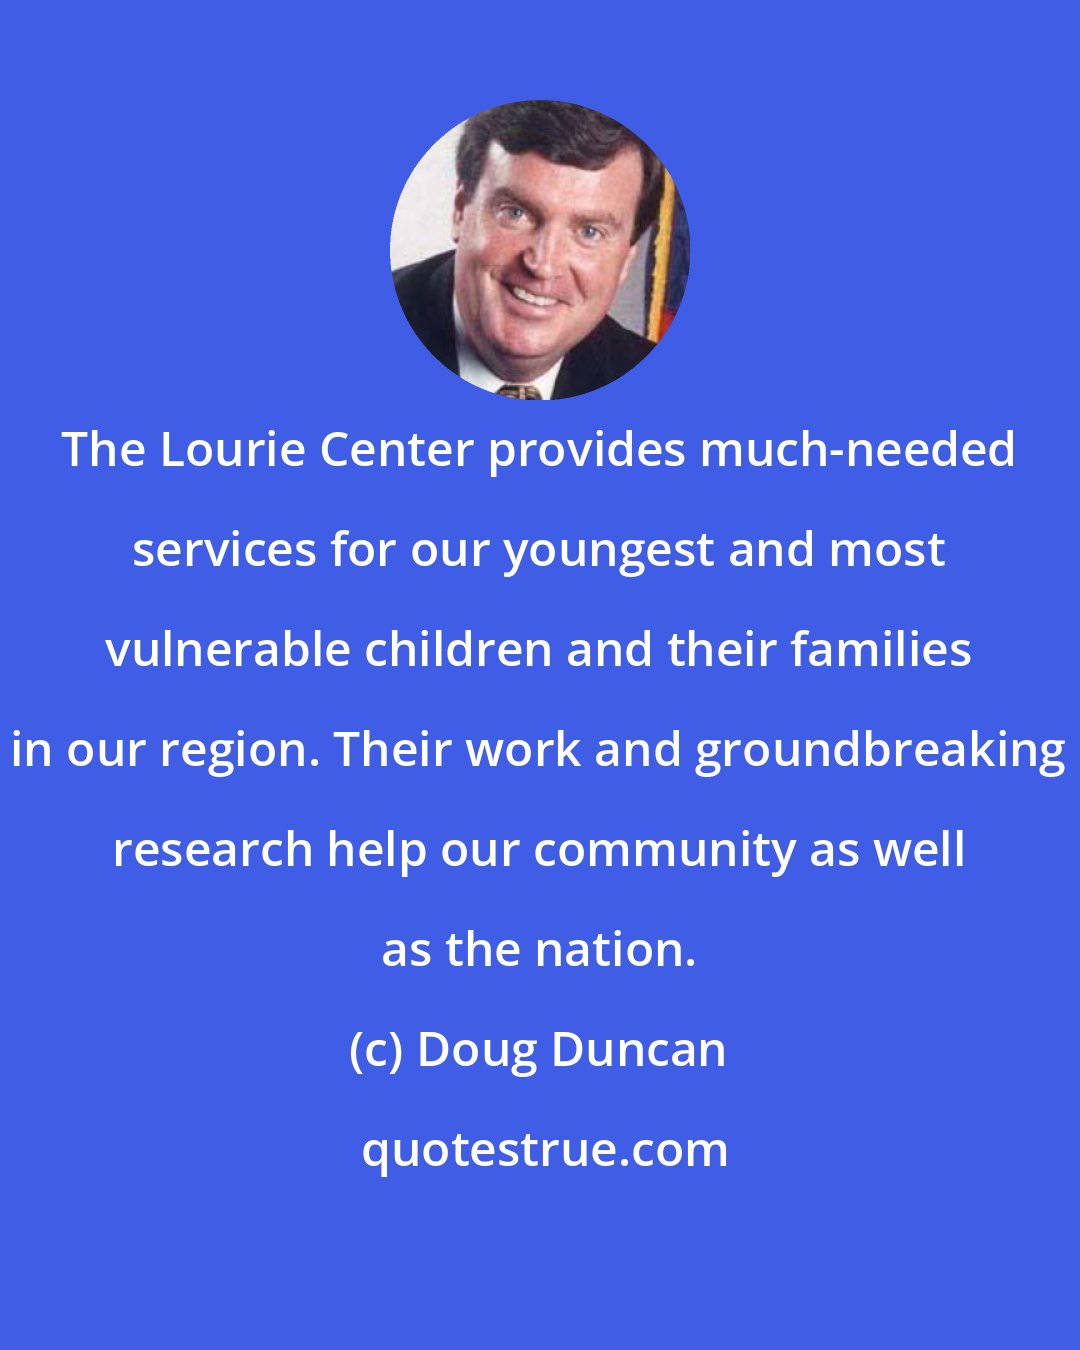 Doug Duncan: The Lourie Center provides much-needed services for our youngest and most vulnerable children and their families in our region. Their work and groundbreaking research help our community as well as the nation.